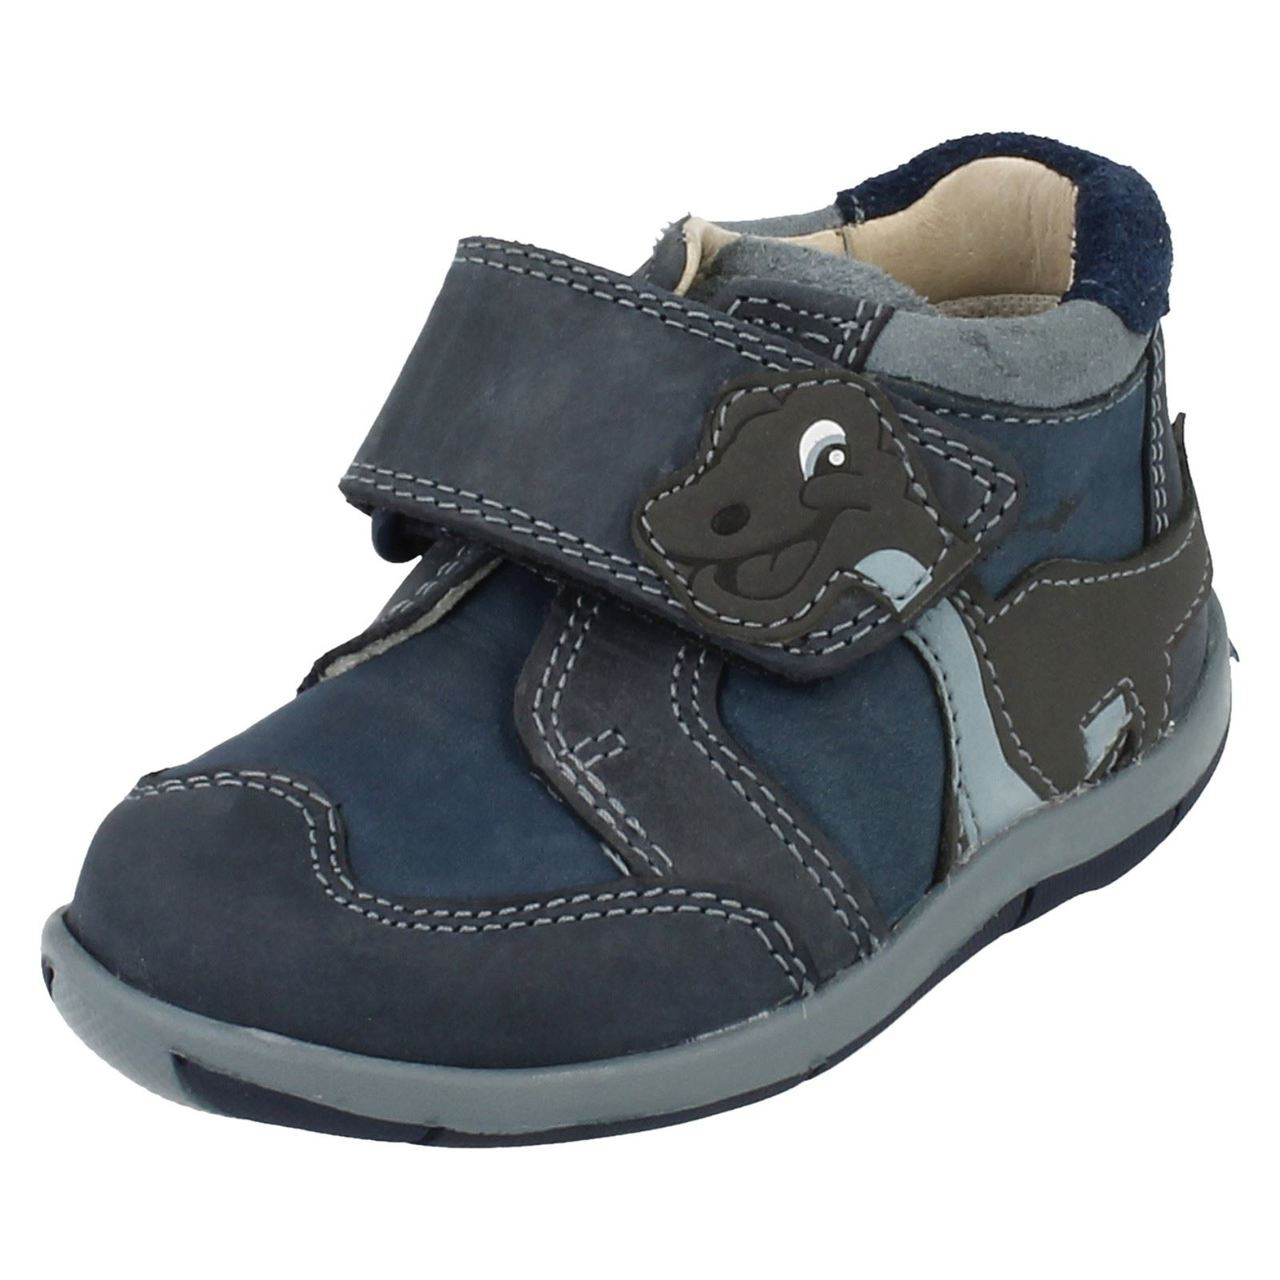 clarks babies first walking shoes